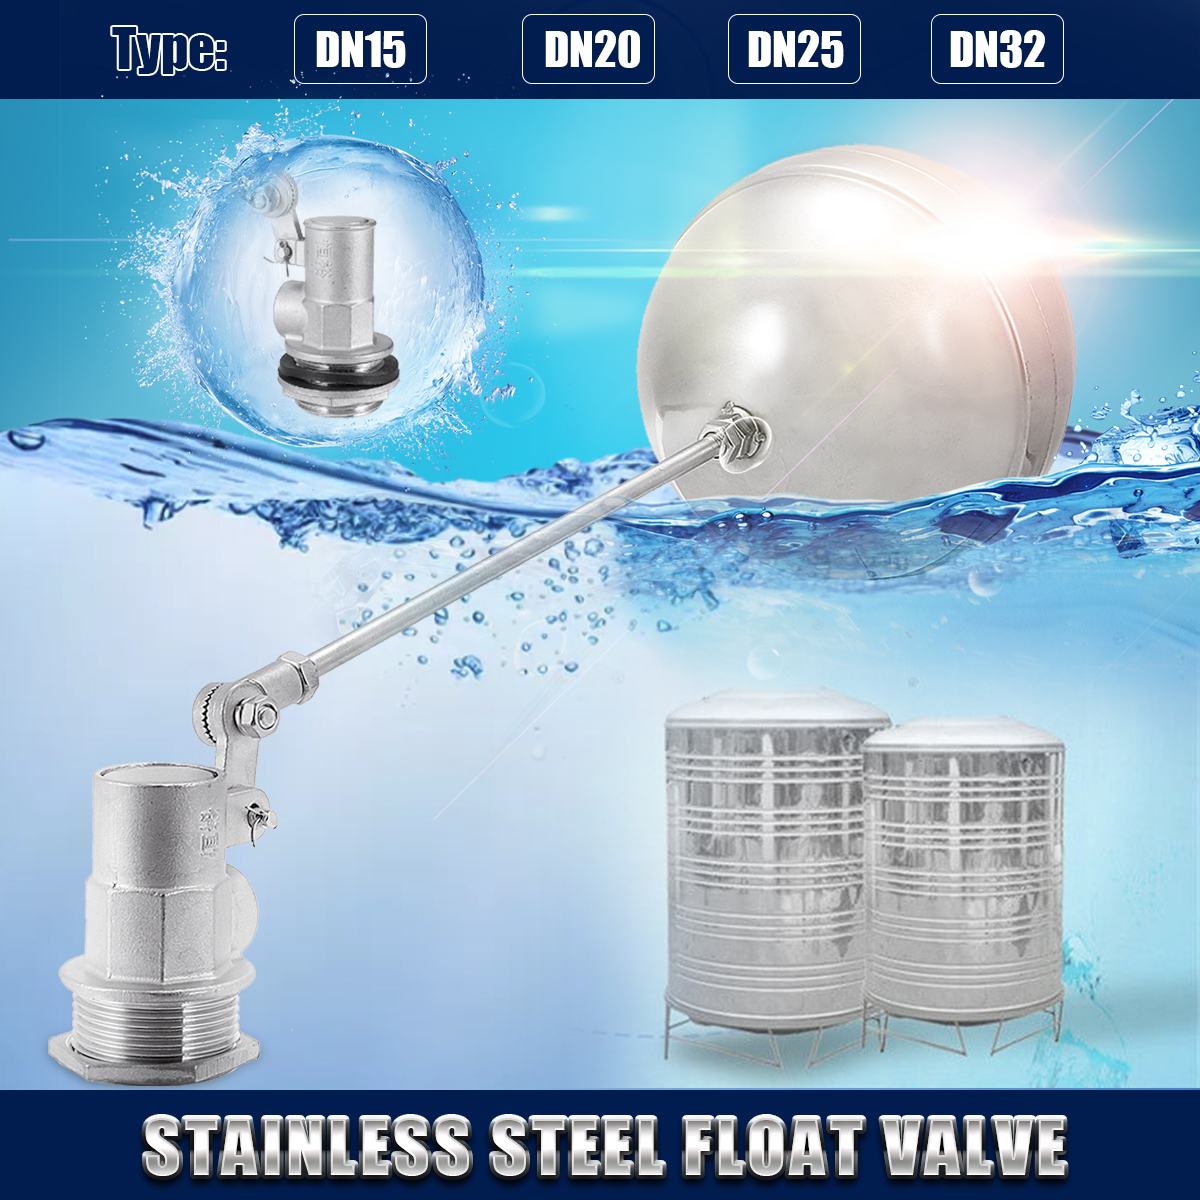 Stainless-Steel-Floating-Ball-Valve-Automatic-Water-Trough-Cattle-Bowl-Tank-1555280